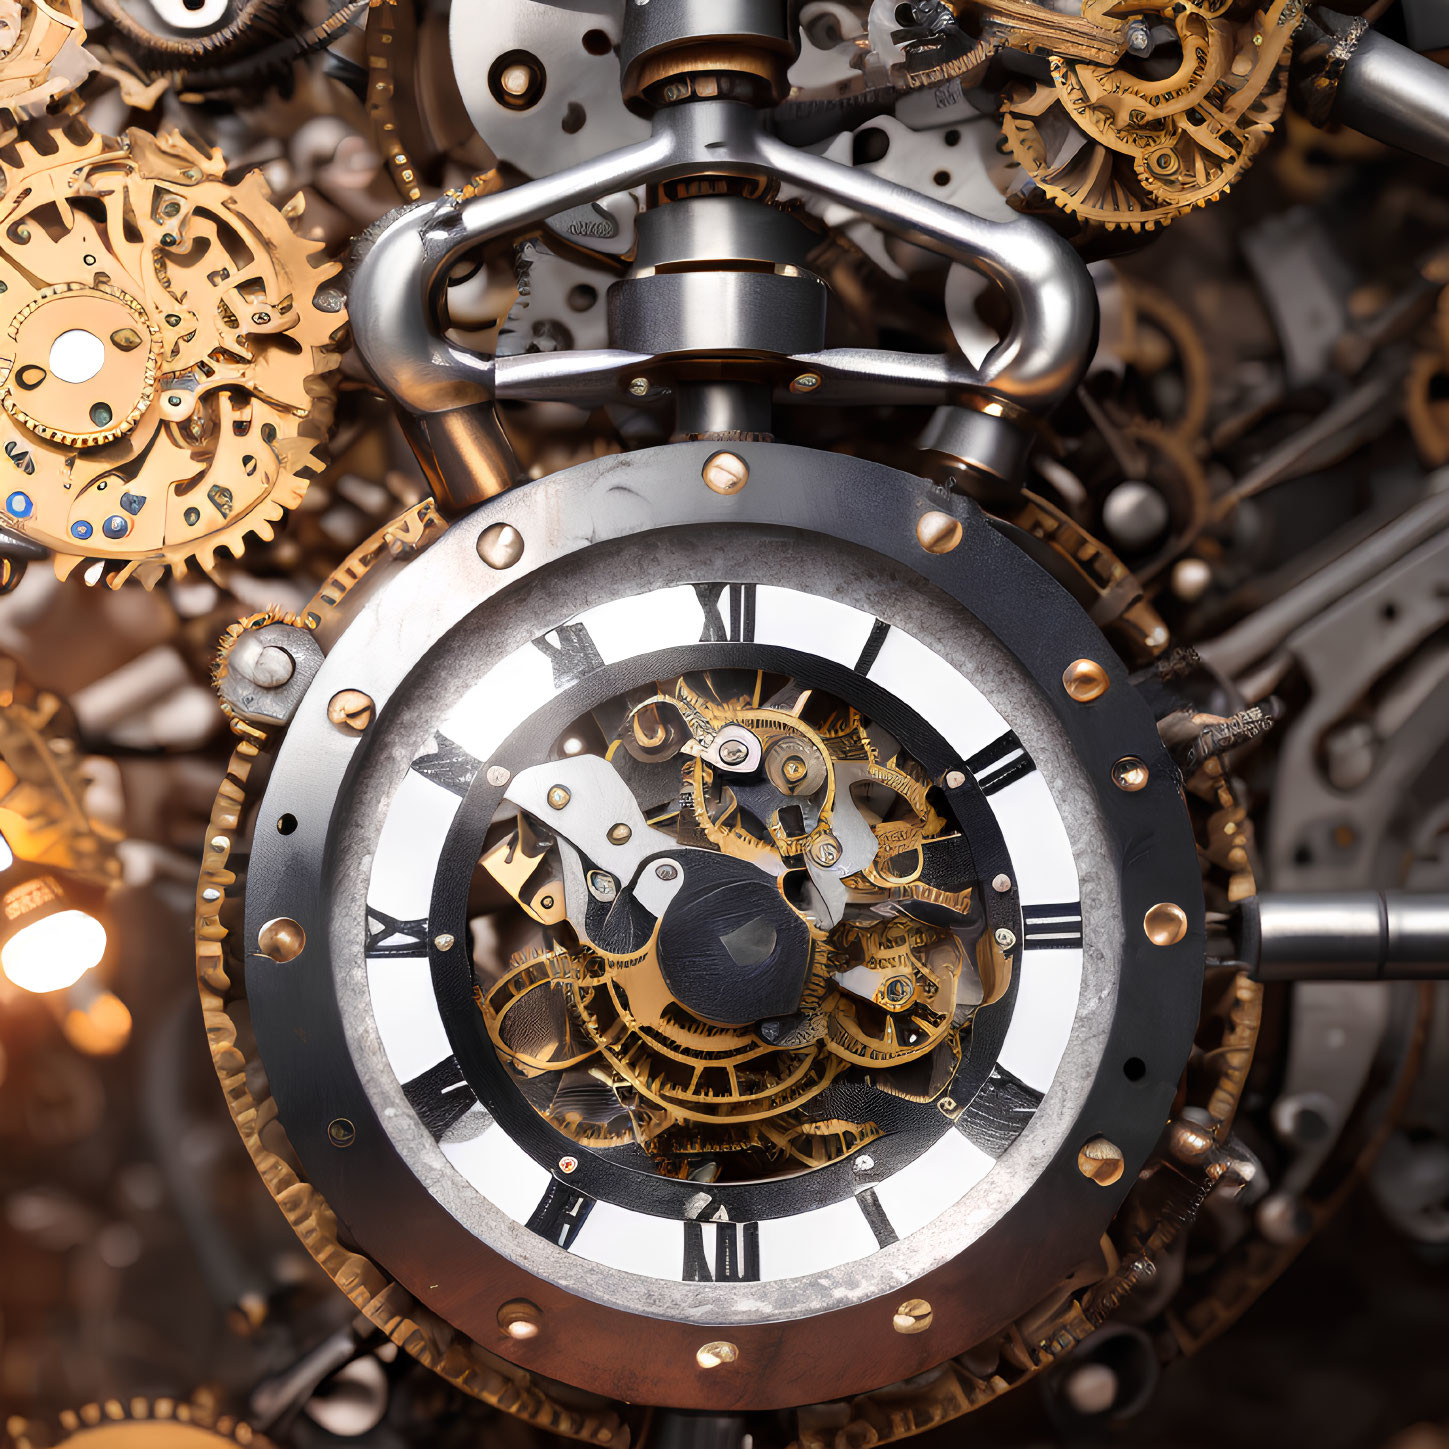 Intricate Steampunk Mechanism with Gears and Cogs